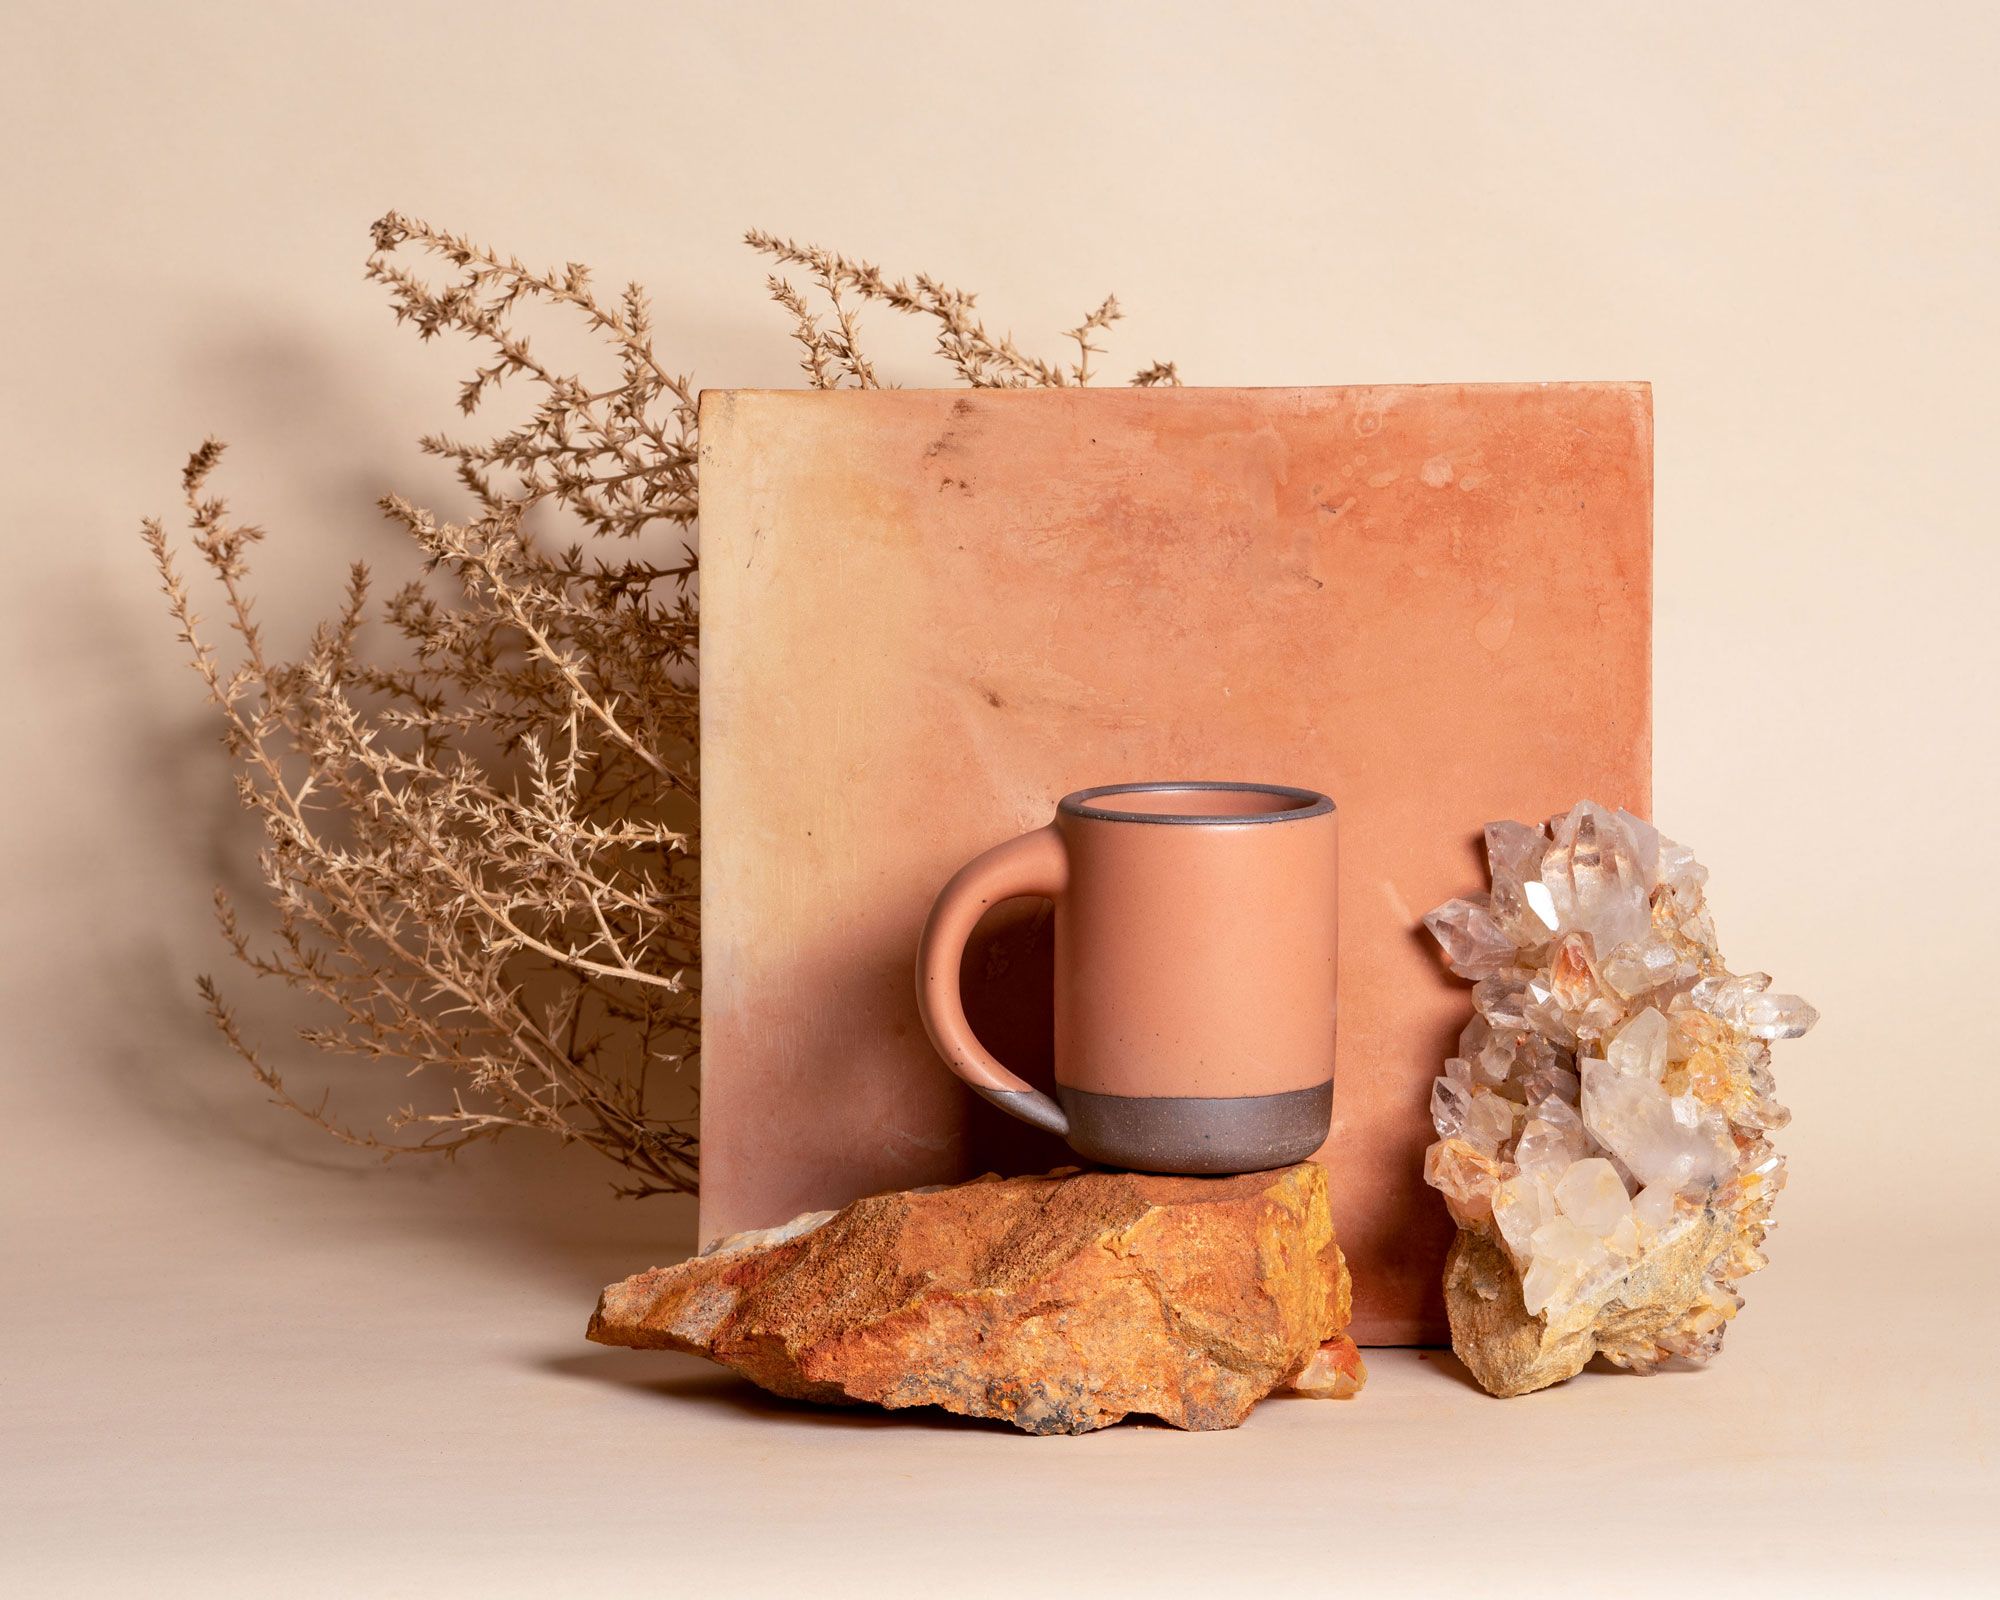 An East Fork Mug in Utah, a soft nude color, photographed with crystals, tumbleweed and other mementos of the desert of which this glaze was named.